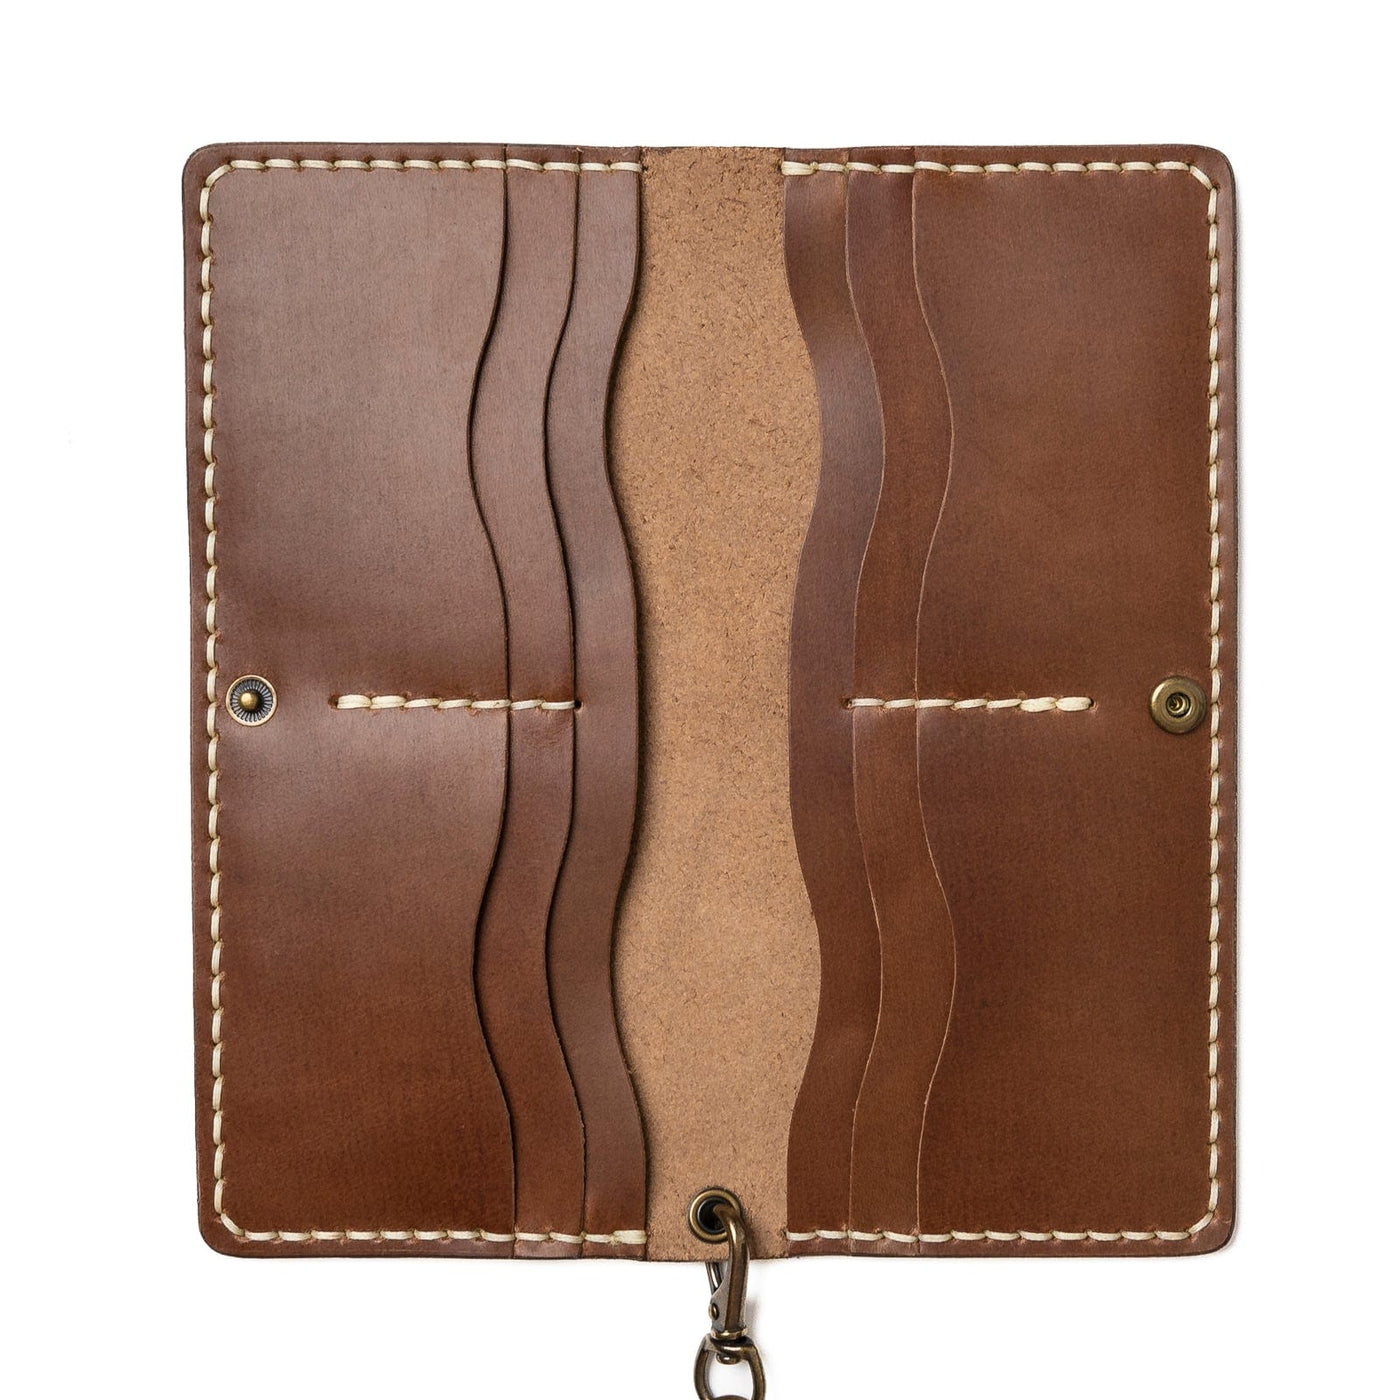 Leather Long Wallet - Natural Popov Leather